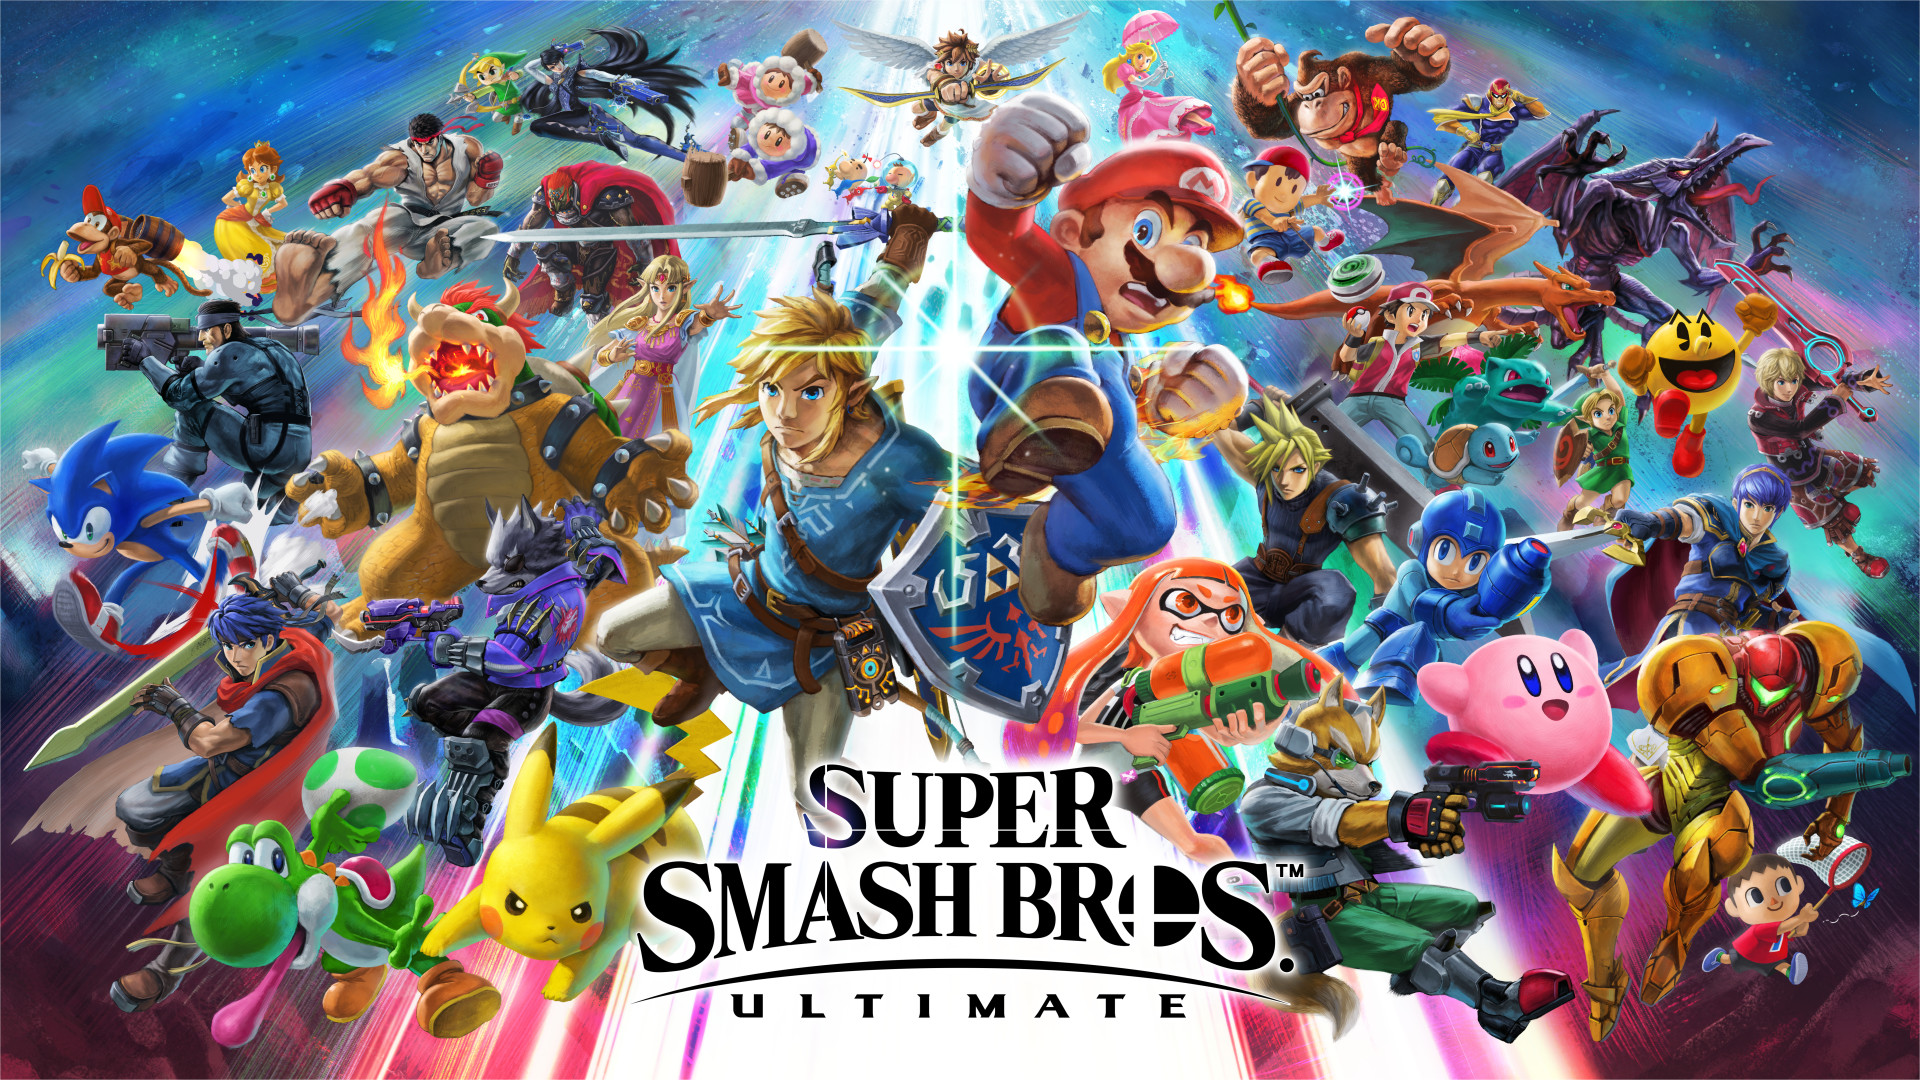 1920x1080 230 Super Smash Bros. Ultimate HD Wallpapers | HintergrÃ¼nde - Wallpaper  Abyss